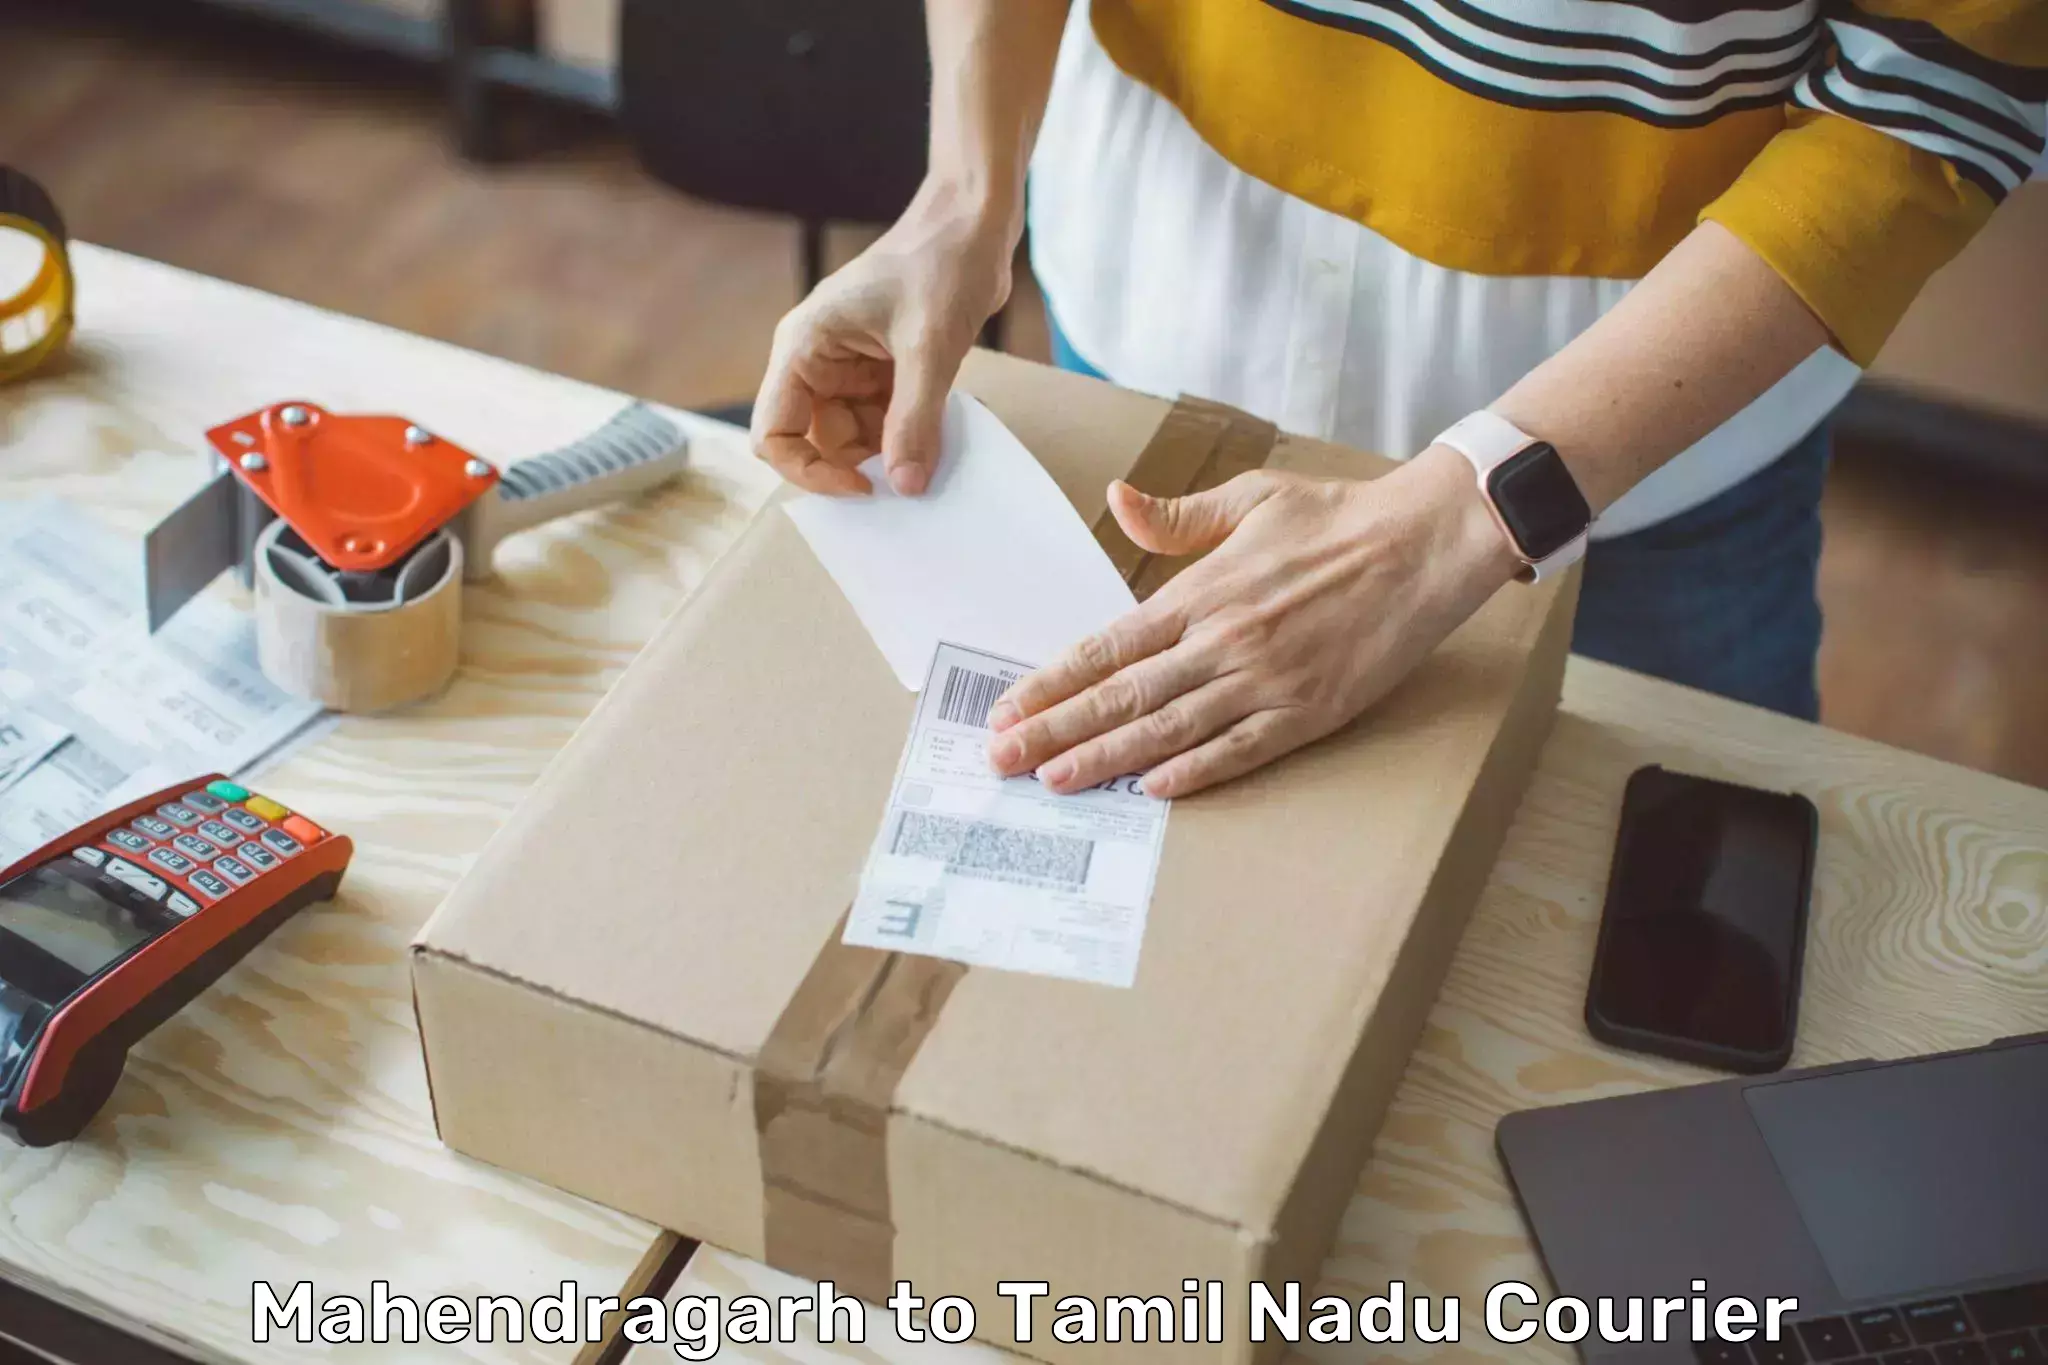 Flexible delivery scheduling Mahendragarh to Tamil Nadu